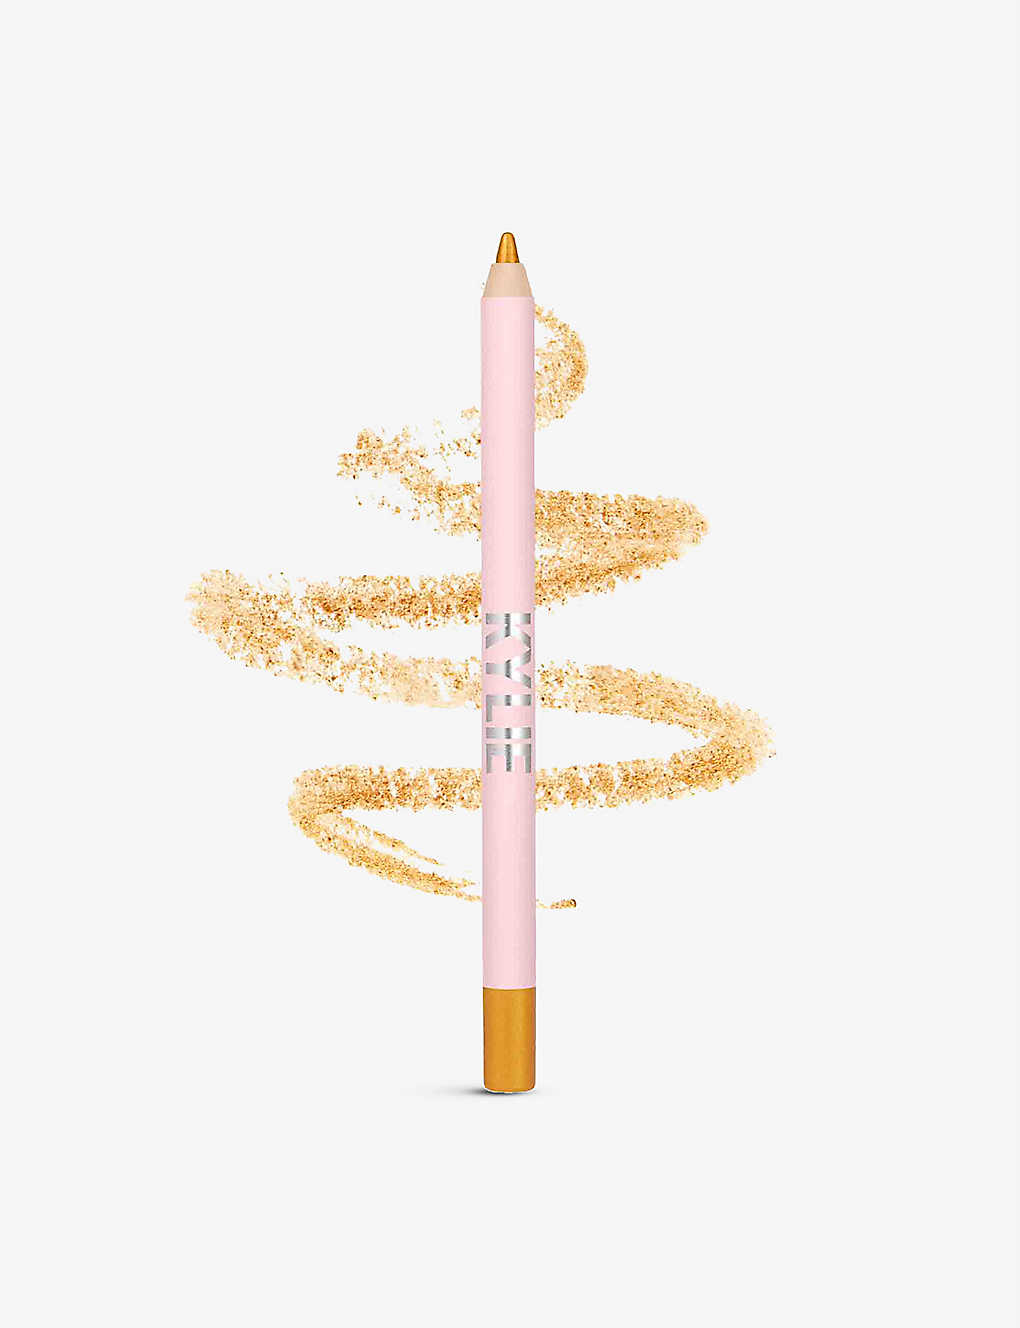 Kylie Cosmetics Kyliner Gel Pencil in Shimmery Gold